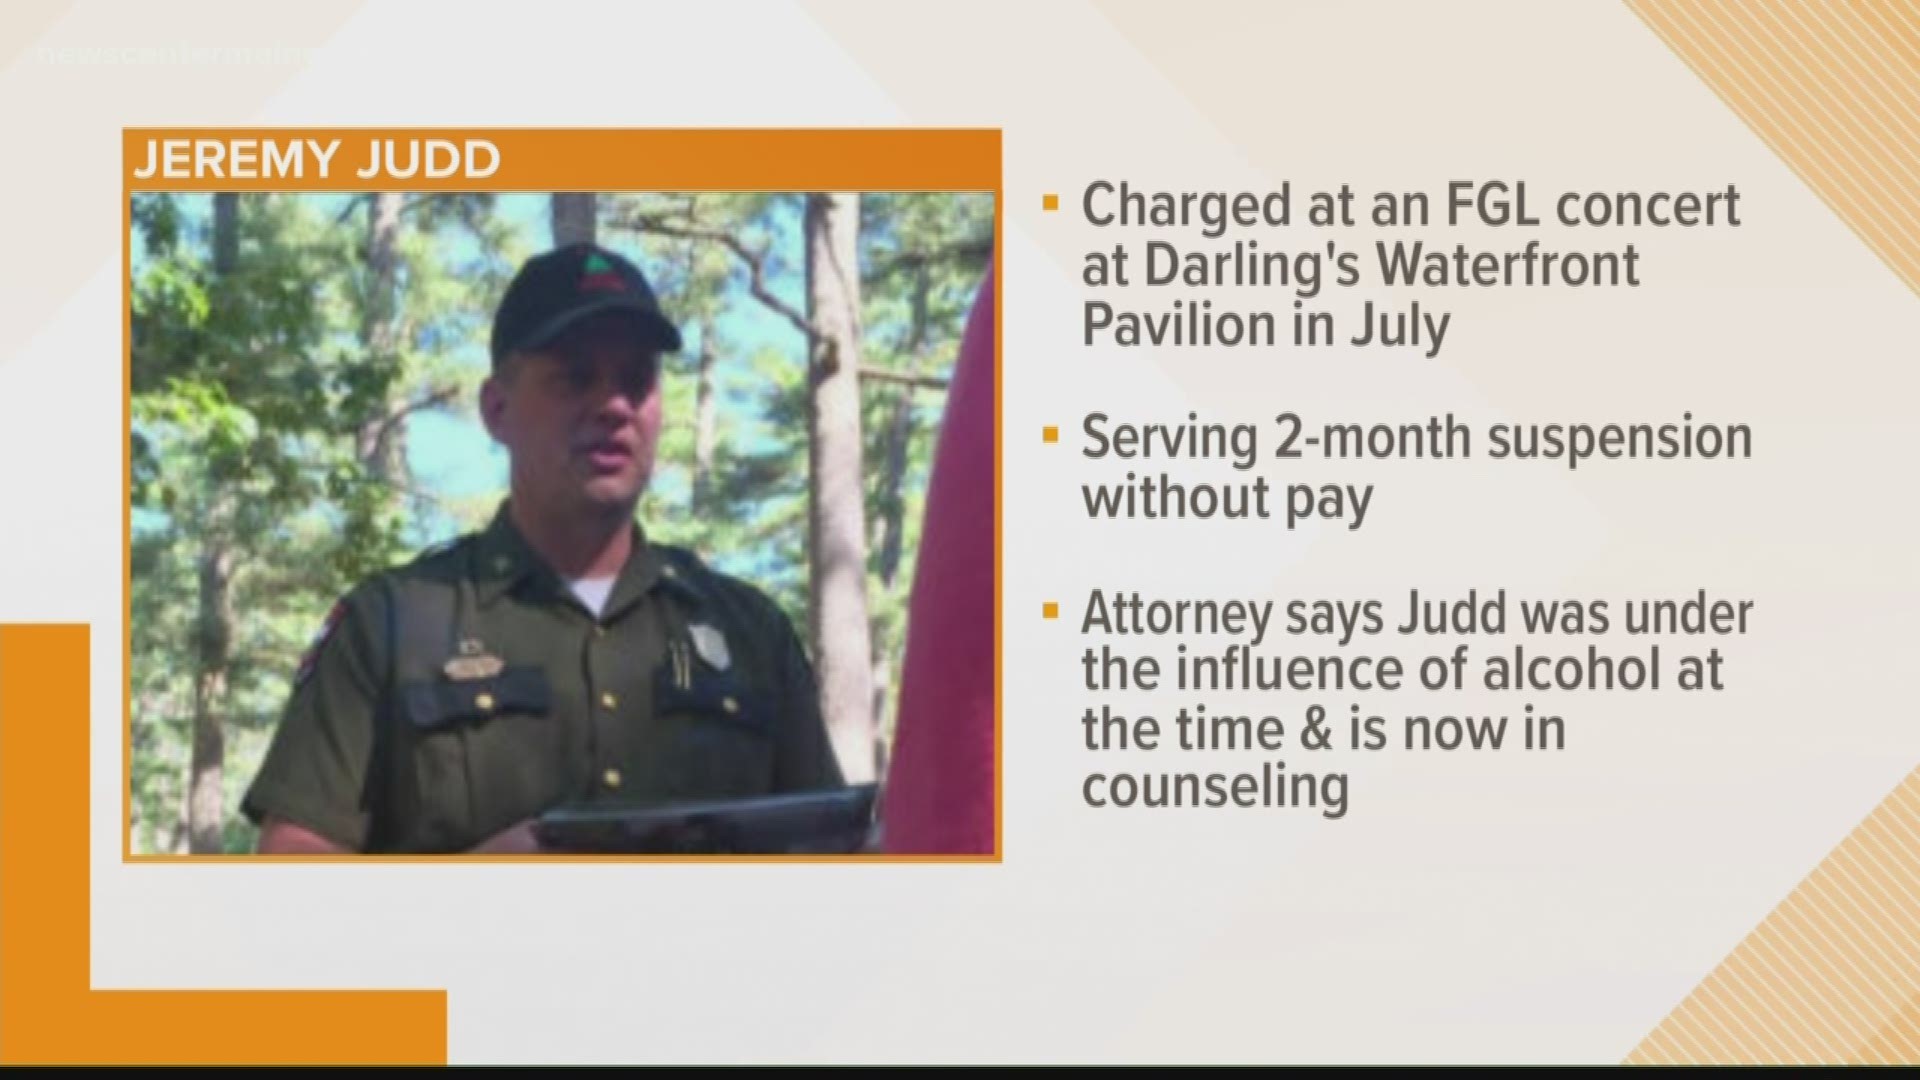 Jeremy Judd, a Maine game warden, has pleaded guilty to charges or disorderly conduct as a result of behavior at a concert in Bangor in July.